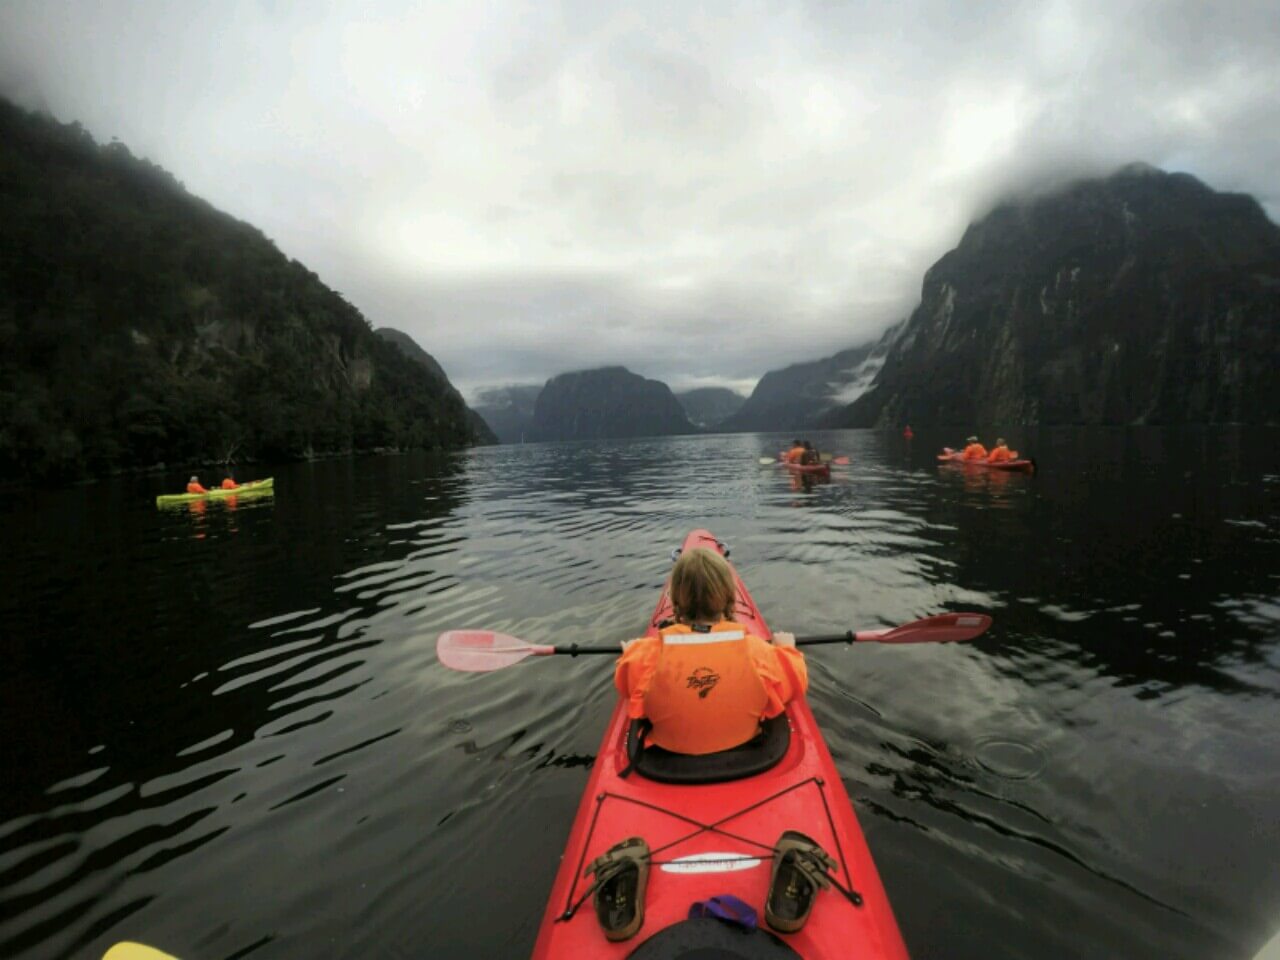 Kayaking in the sound